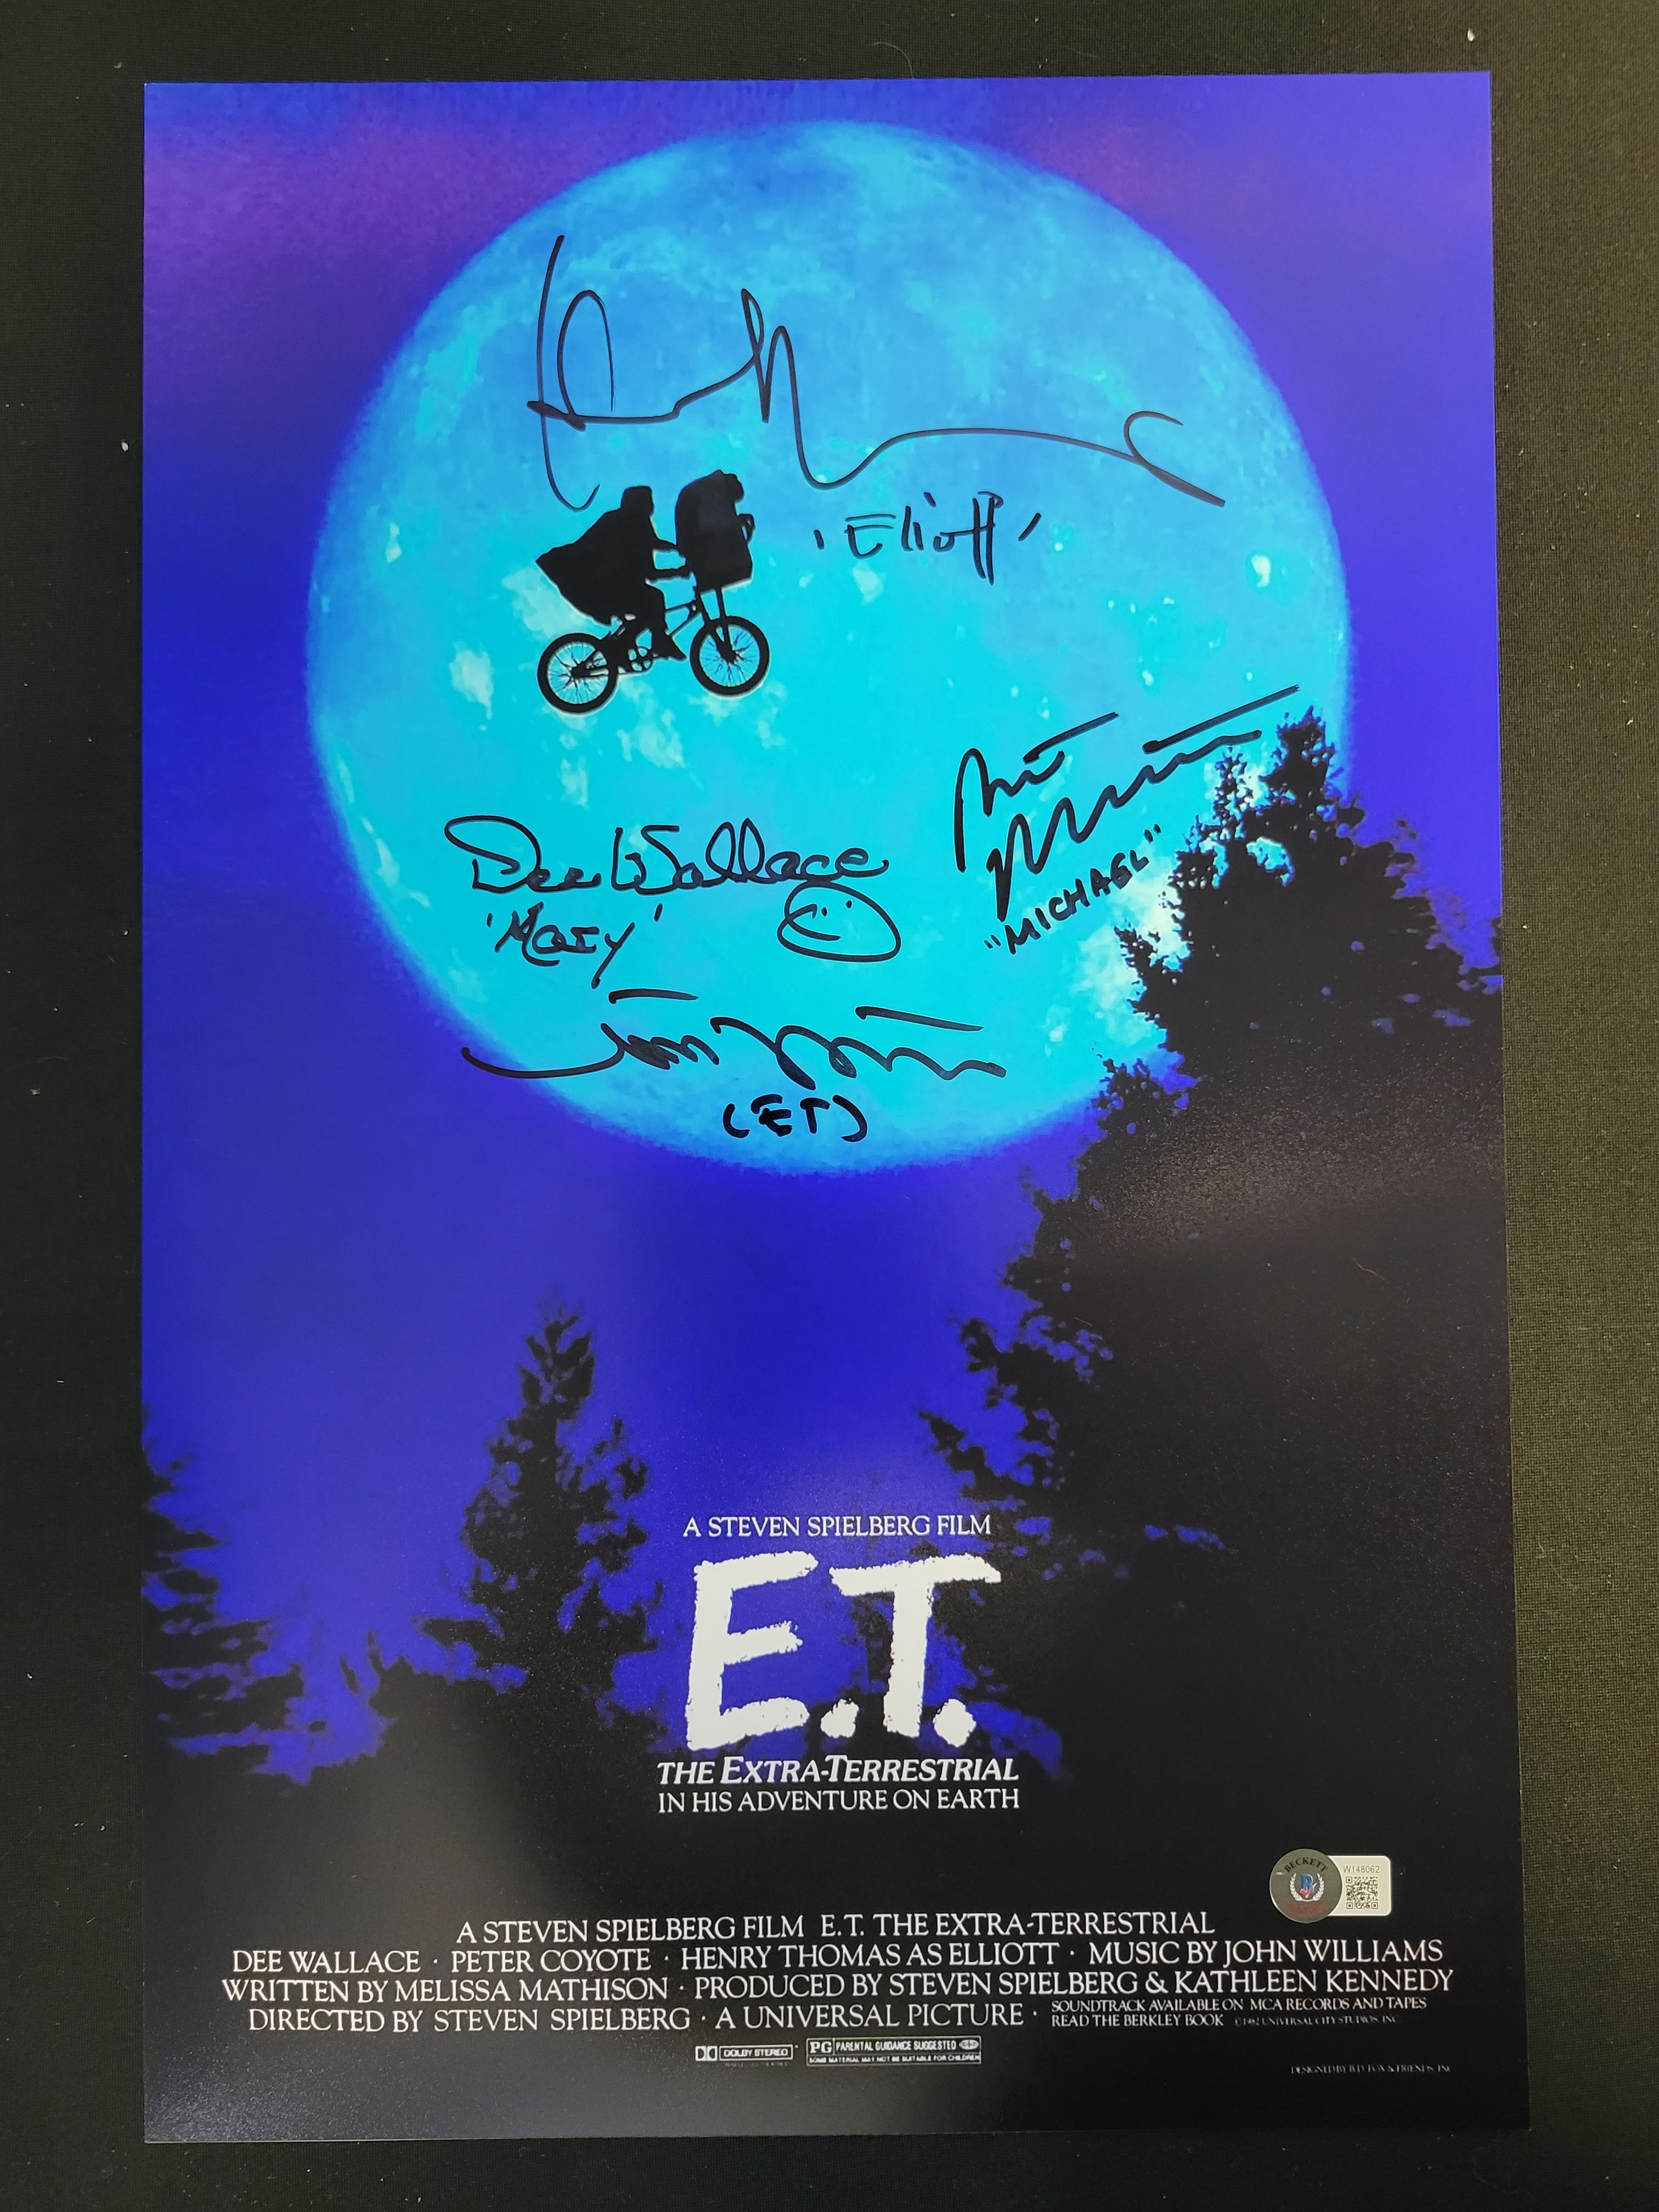 12 "x 18" E.T. Mini Poster with Autographs of 4 Major Cast Members